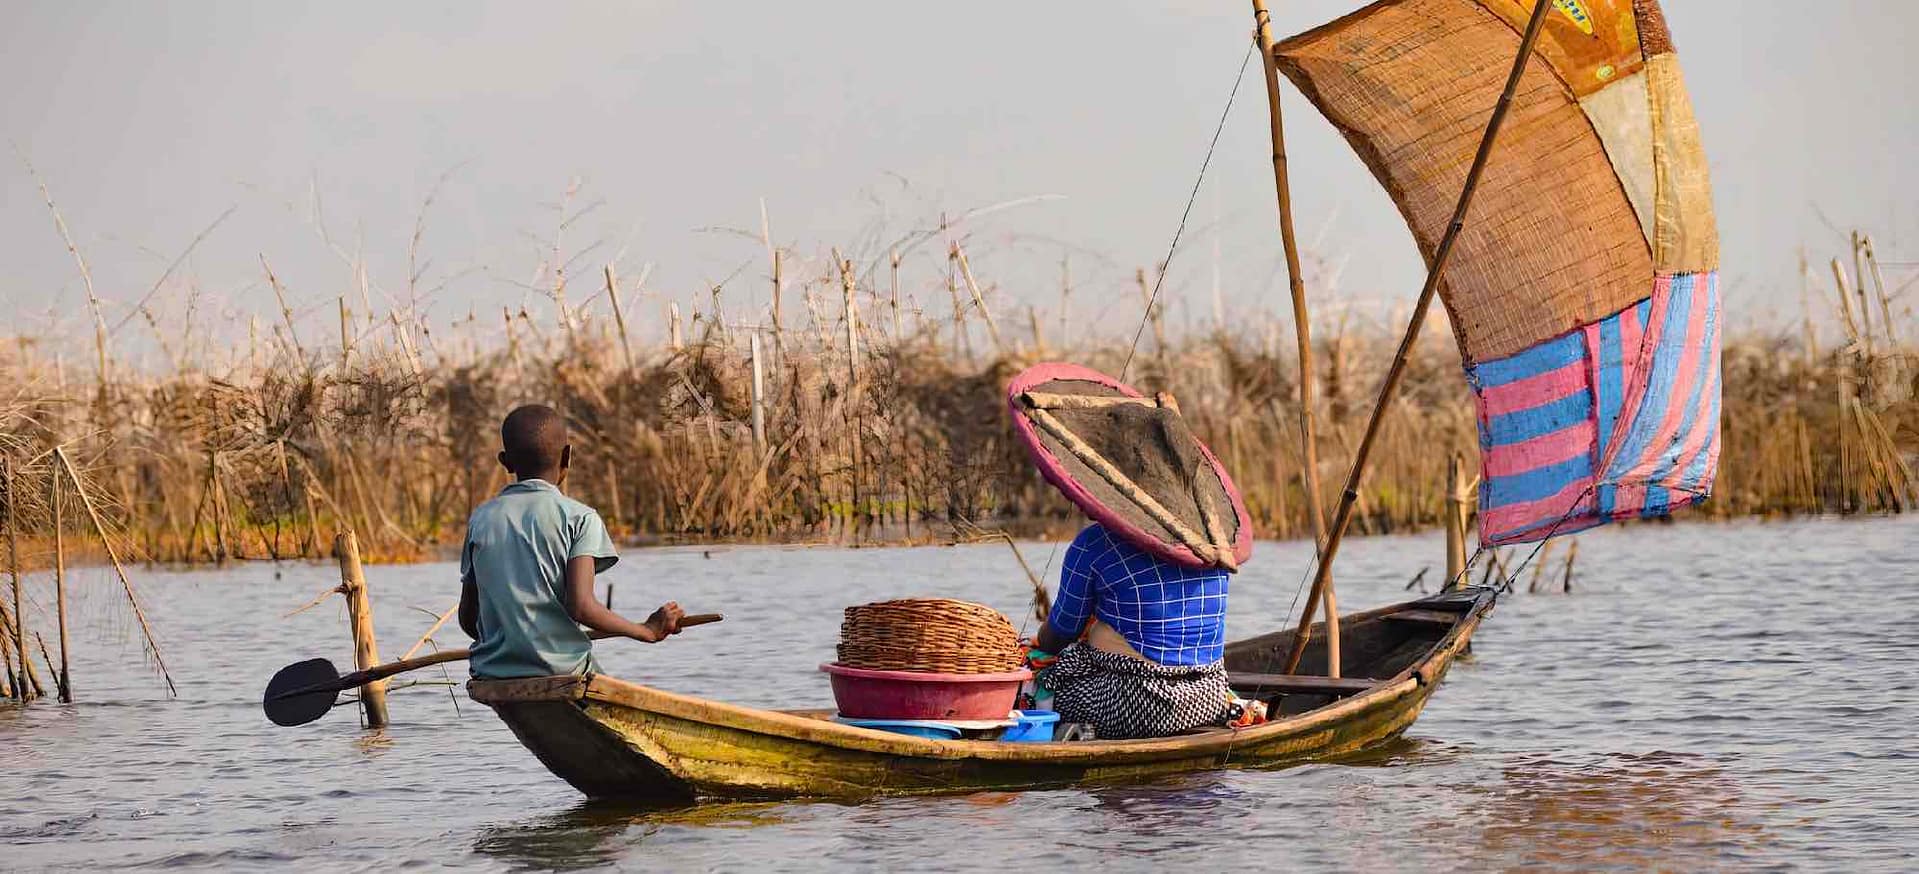 A woman and child in a wooden boat in a river channel.